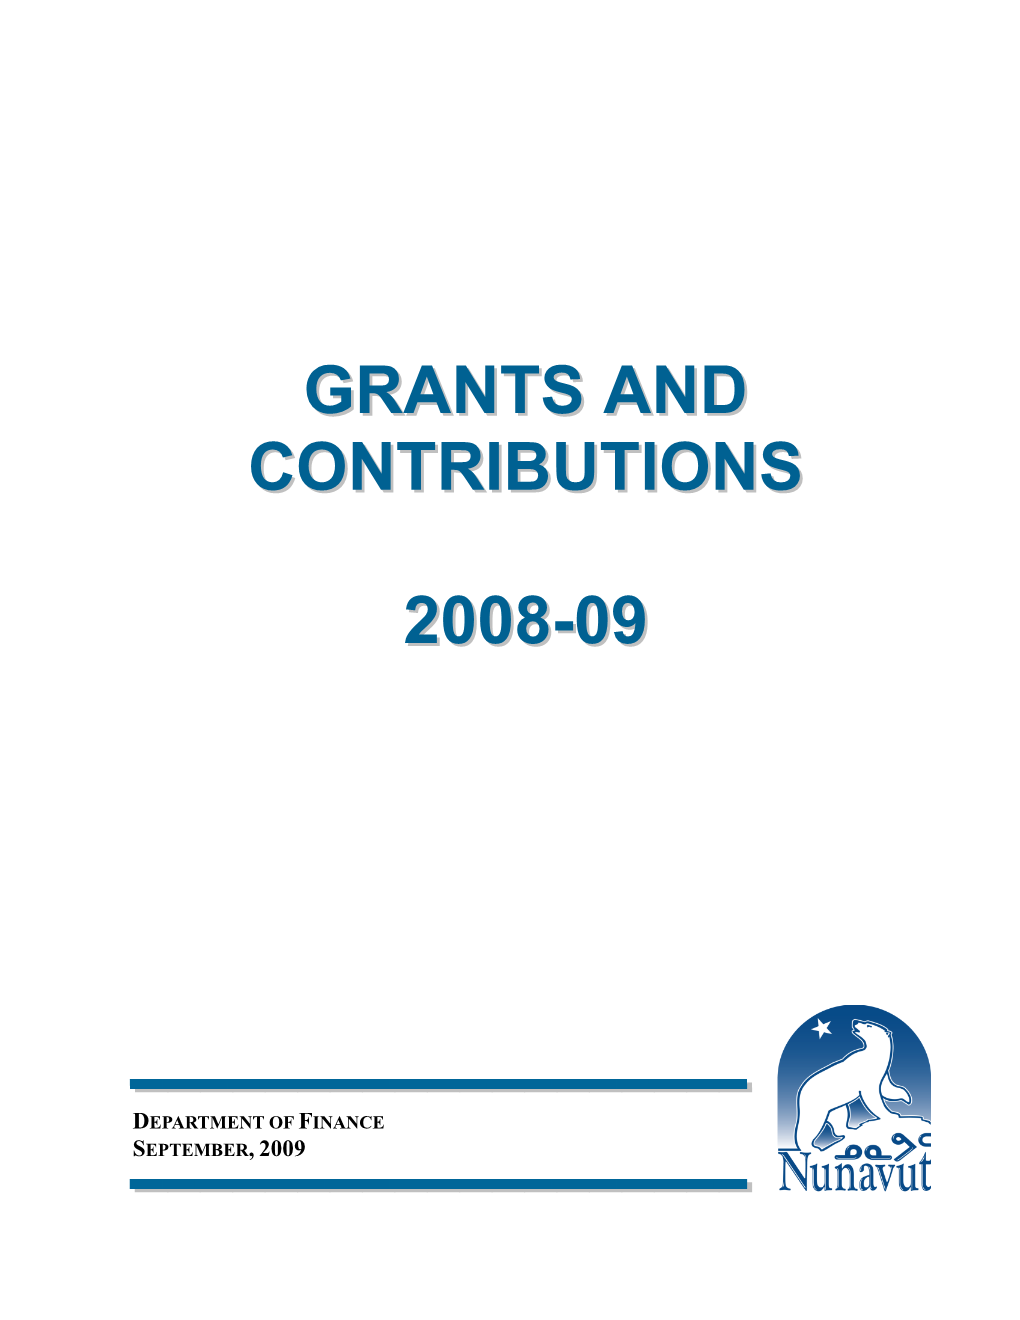 2008-09 Grants and Contributions by Department, Including Recipient, Amount and Purpose of the Funds